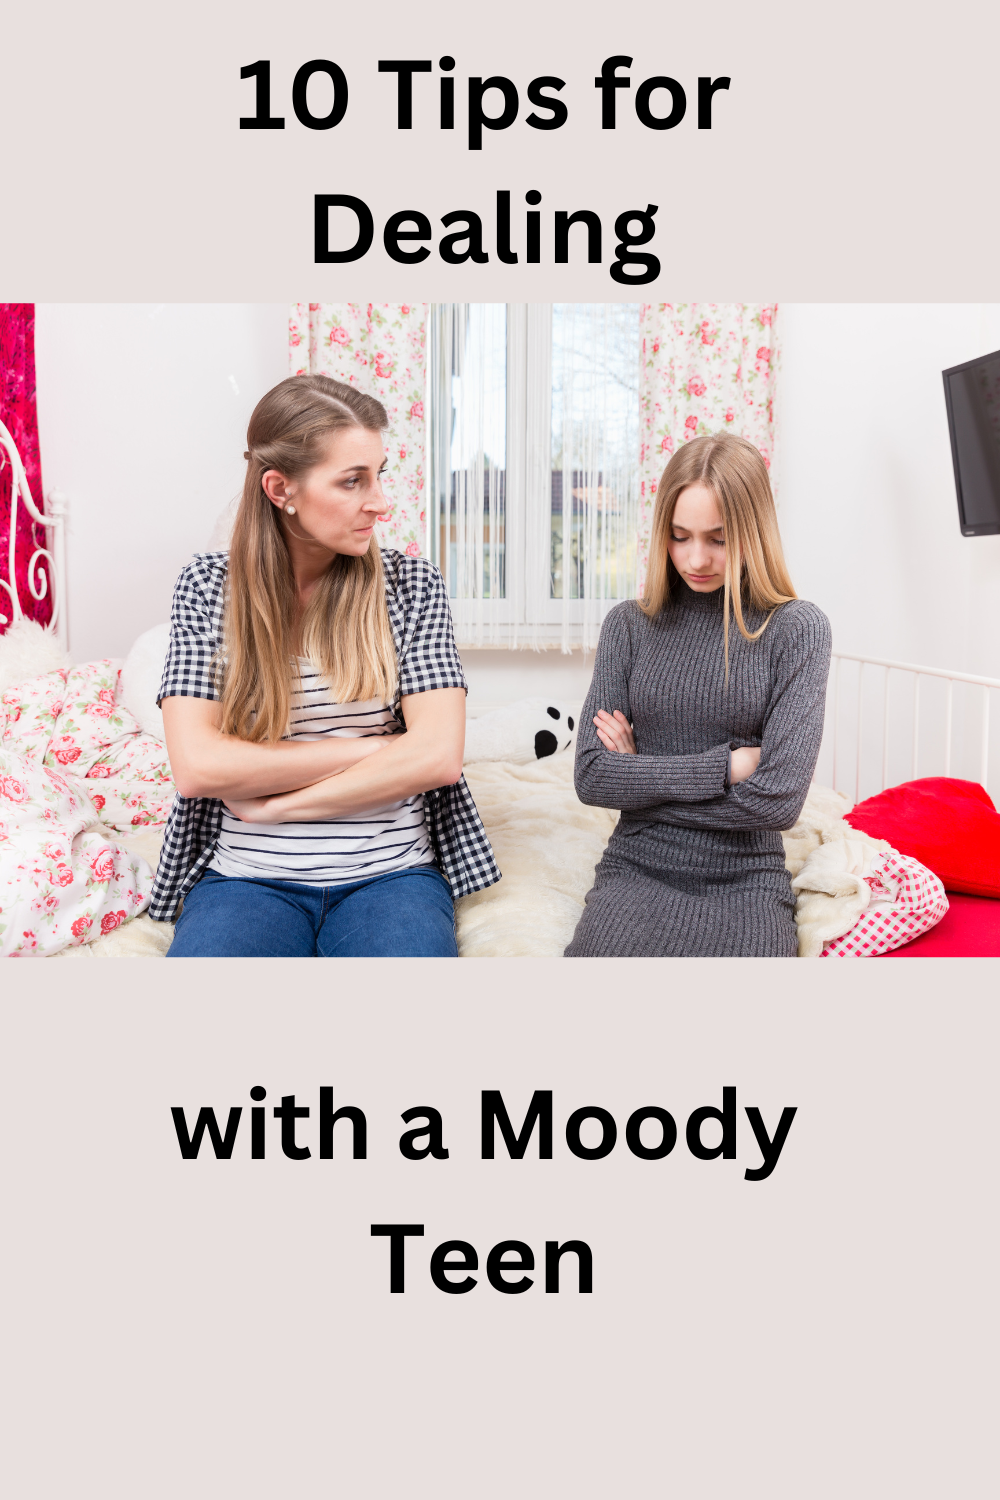 How to Deal with a Moody Teen